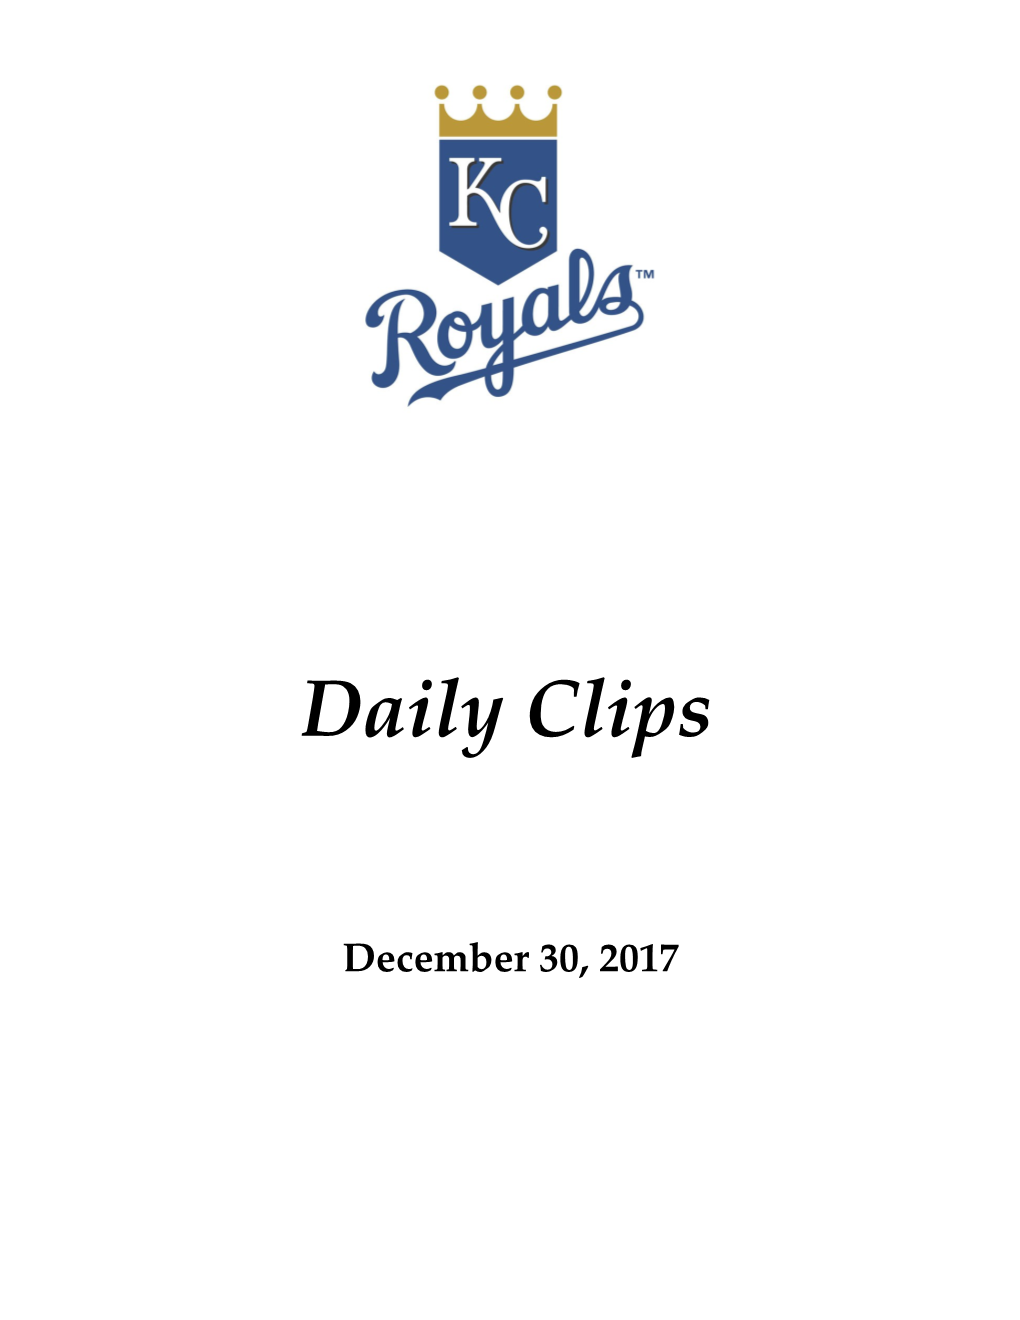 How the Slow Offseason Could Affect the Royals and Their Free Agents